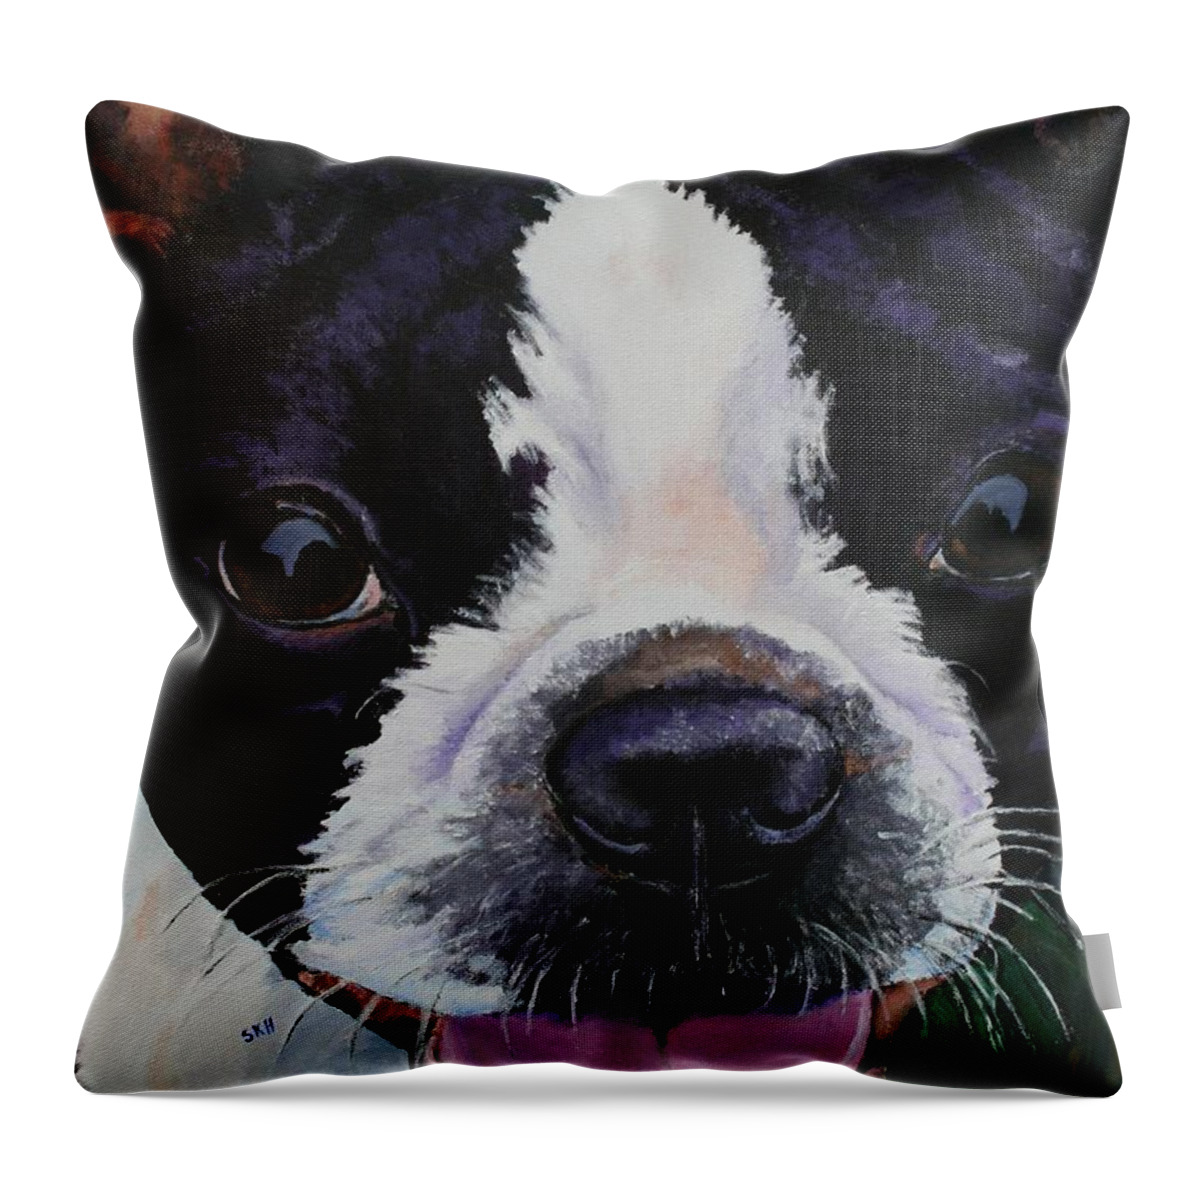 Boston Terrier Throw Pillow featuring the painting Grins by Susan Herber